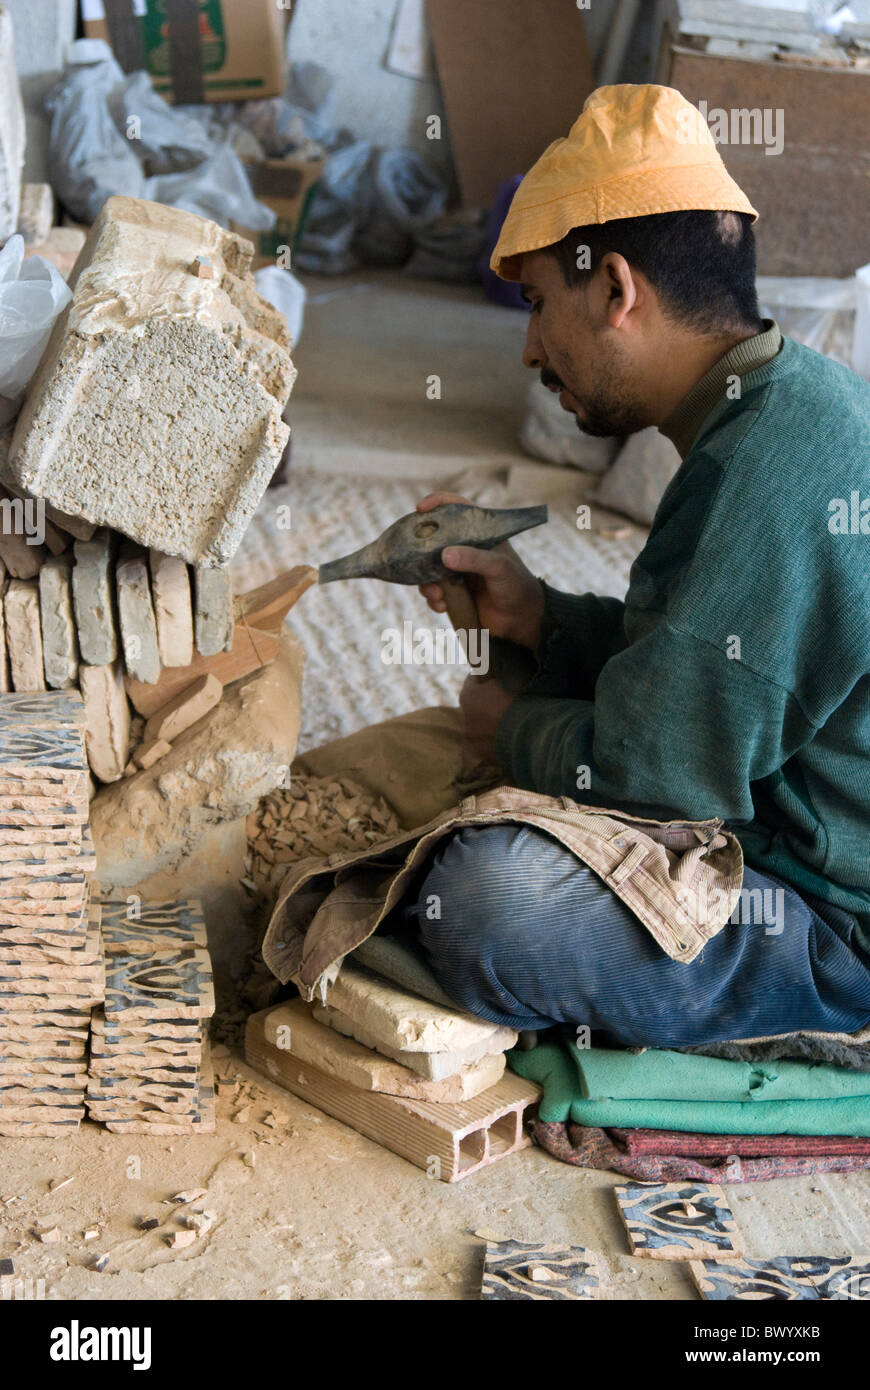 Ceramic factory in Fez, Morocco. Worker Stock Photo